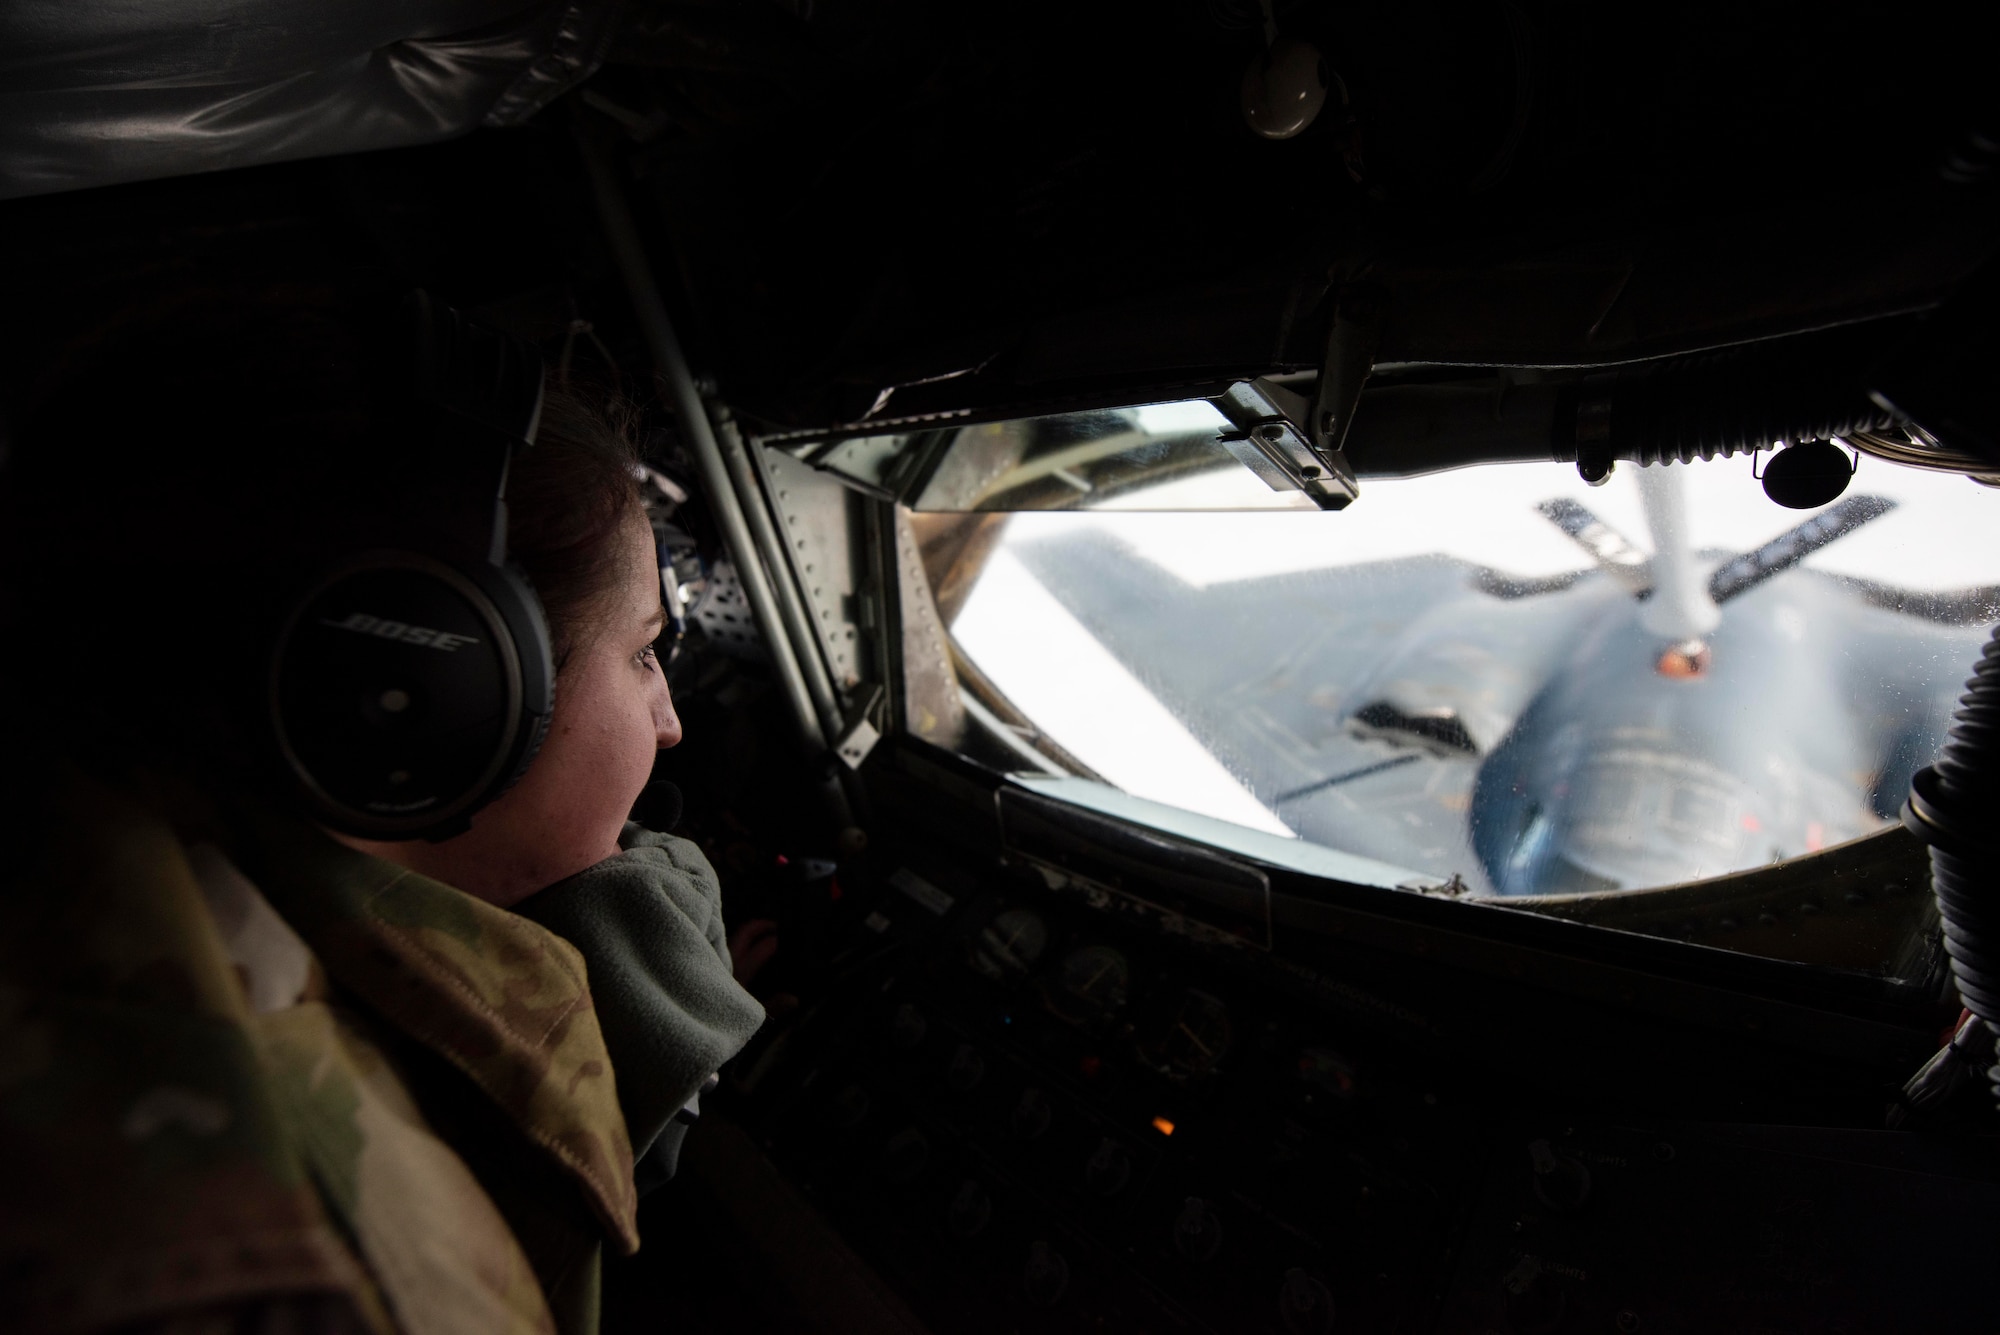 Staff Sgt. Kaylene LaRose, 351st Air Refueling Squadron boom operator, refuels a B-2 Spirit assigned to the 509th Bomb Wing at Whiteman Air Force Base, Missouri, over the North Sea June 18, 2020.  Two female aircrews in a four-ship formation refueled B-2 Spirits conducting a strategic bomber mission north of the Arctic Circle. (U.S. Air Force photo by Airman 1st Class Joseph Barron)